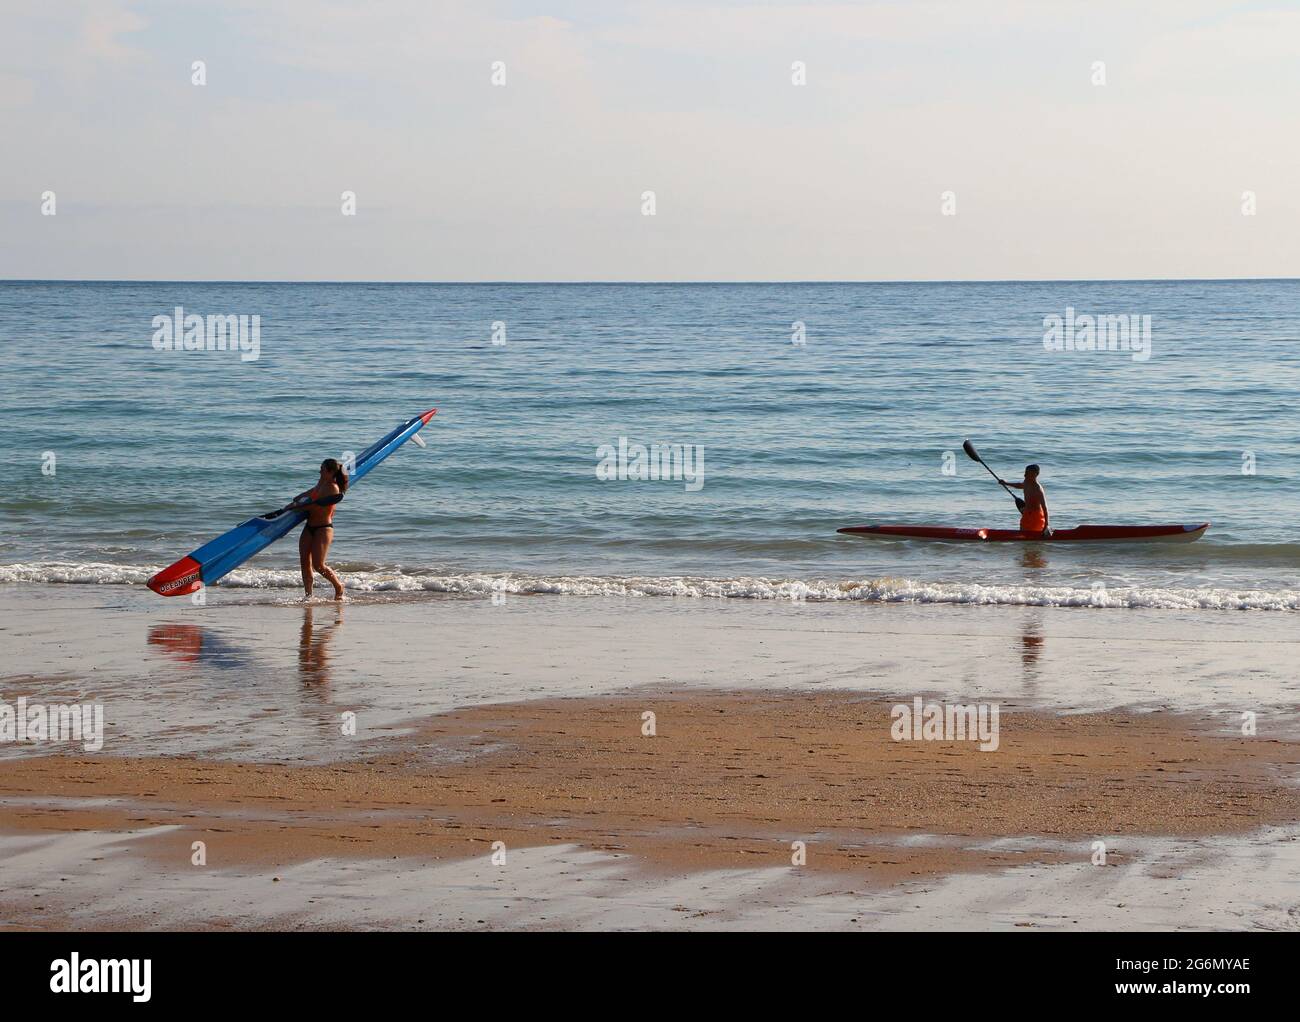 Young woman carrying a surf ski on the beach with a young man preparing to carry his out of the water Sardinero Santander Cantabria Spain Stock Photo